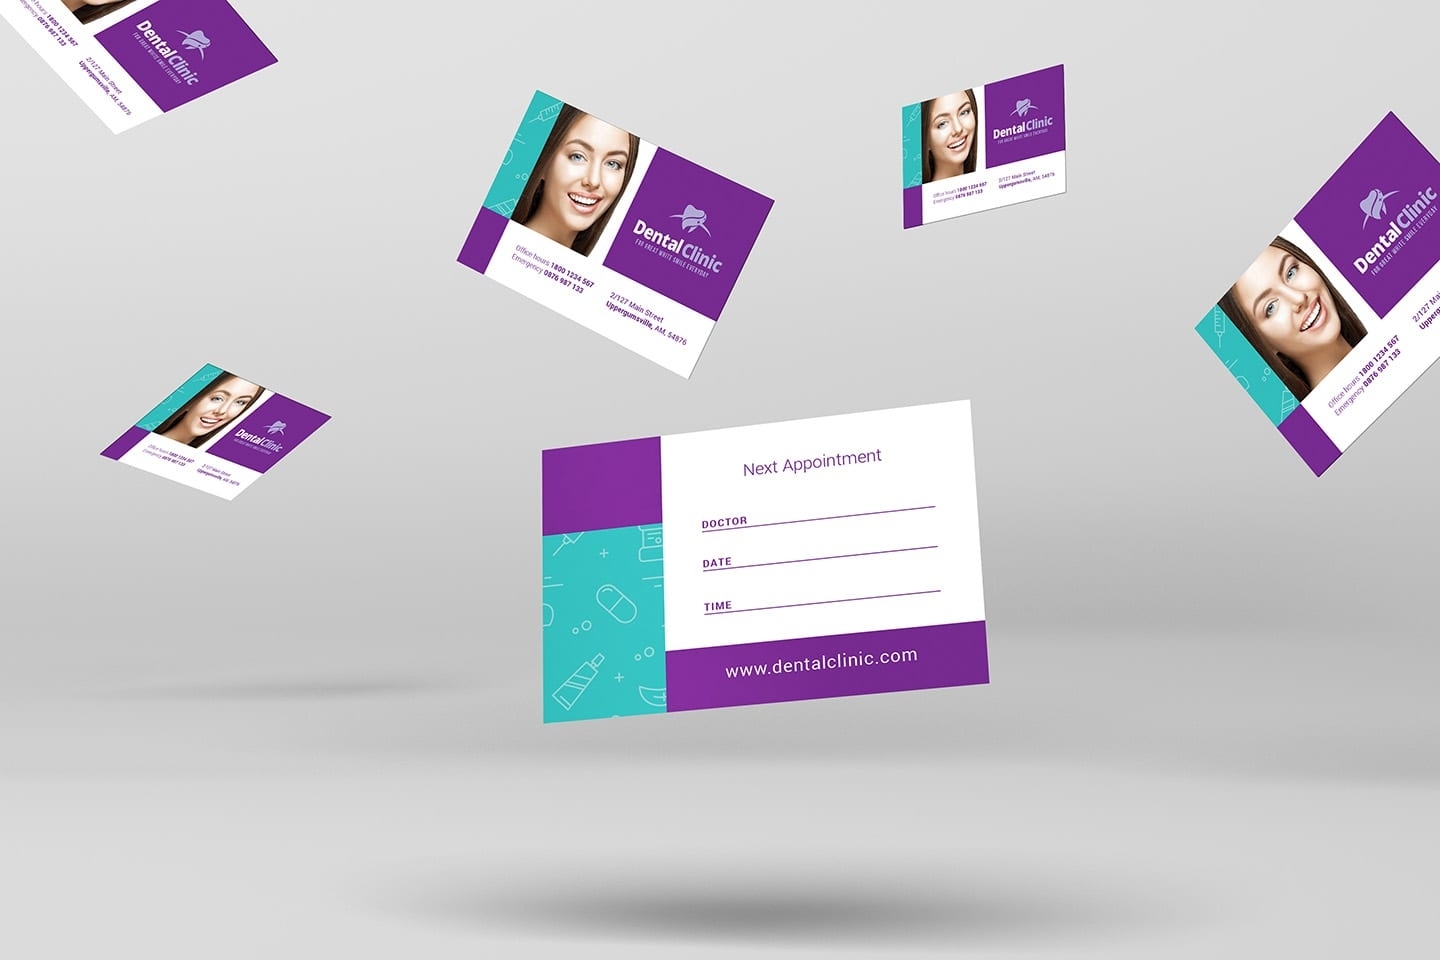 Dental Clinic Appointment Card Template In Psd, Ai & Vector – Brandpacks Within Dentist Appointment Card Template